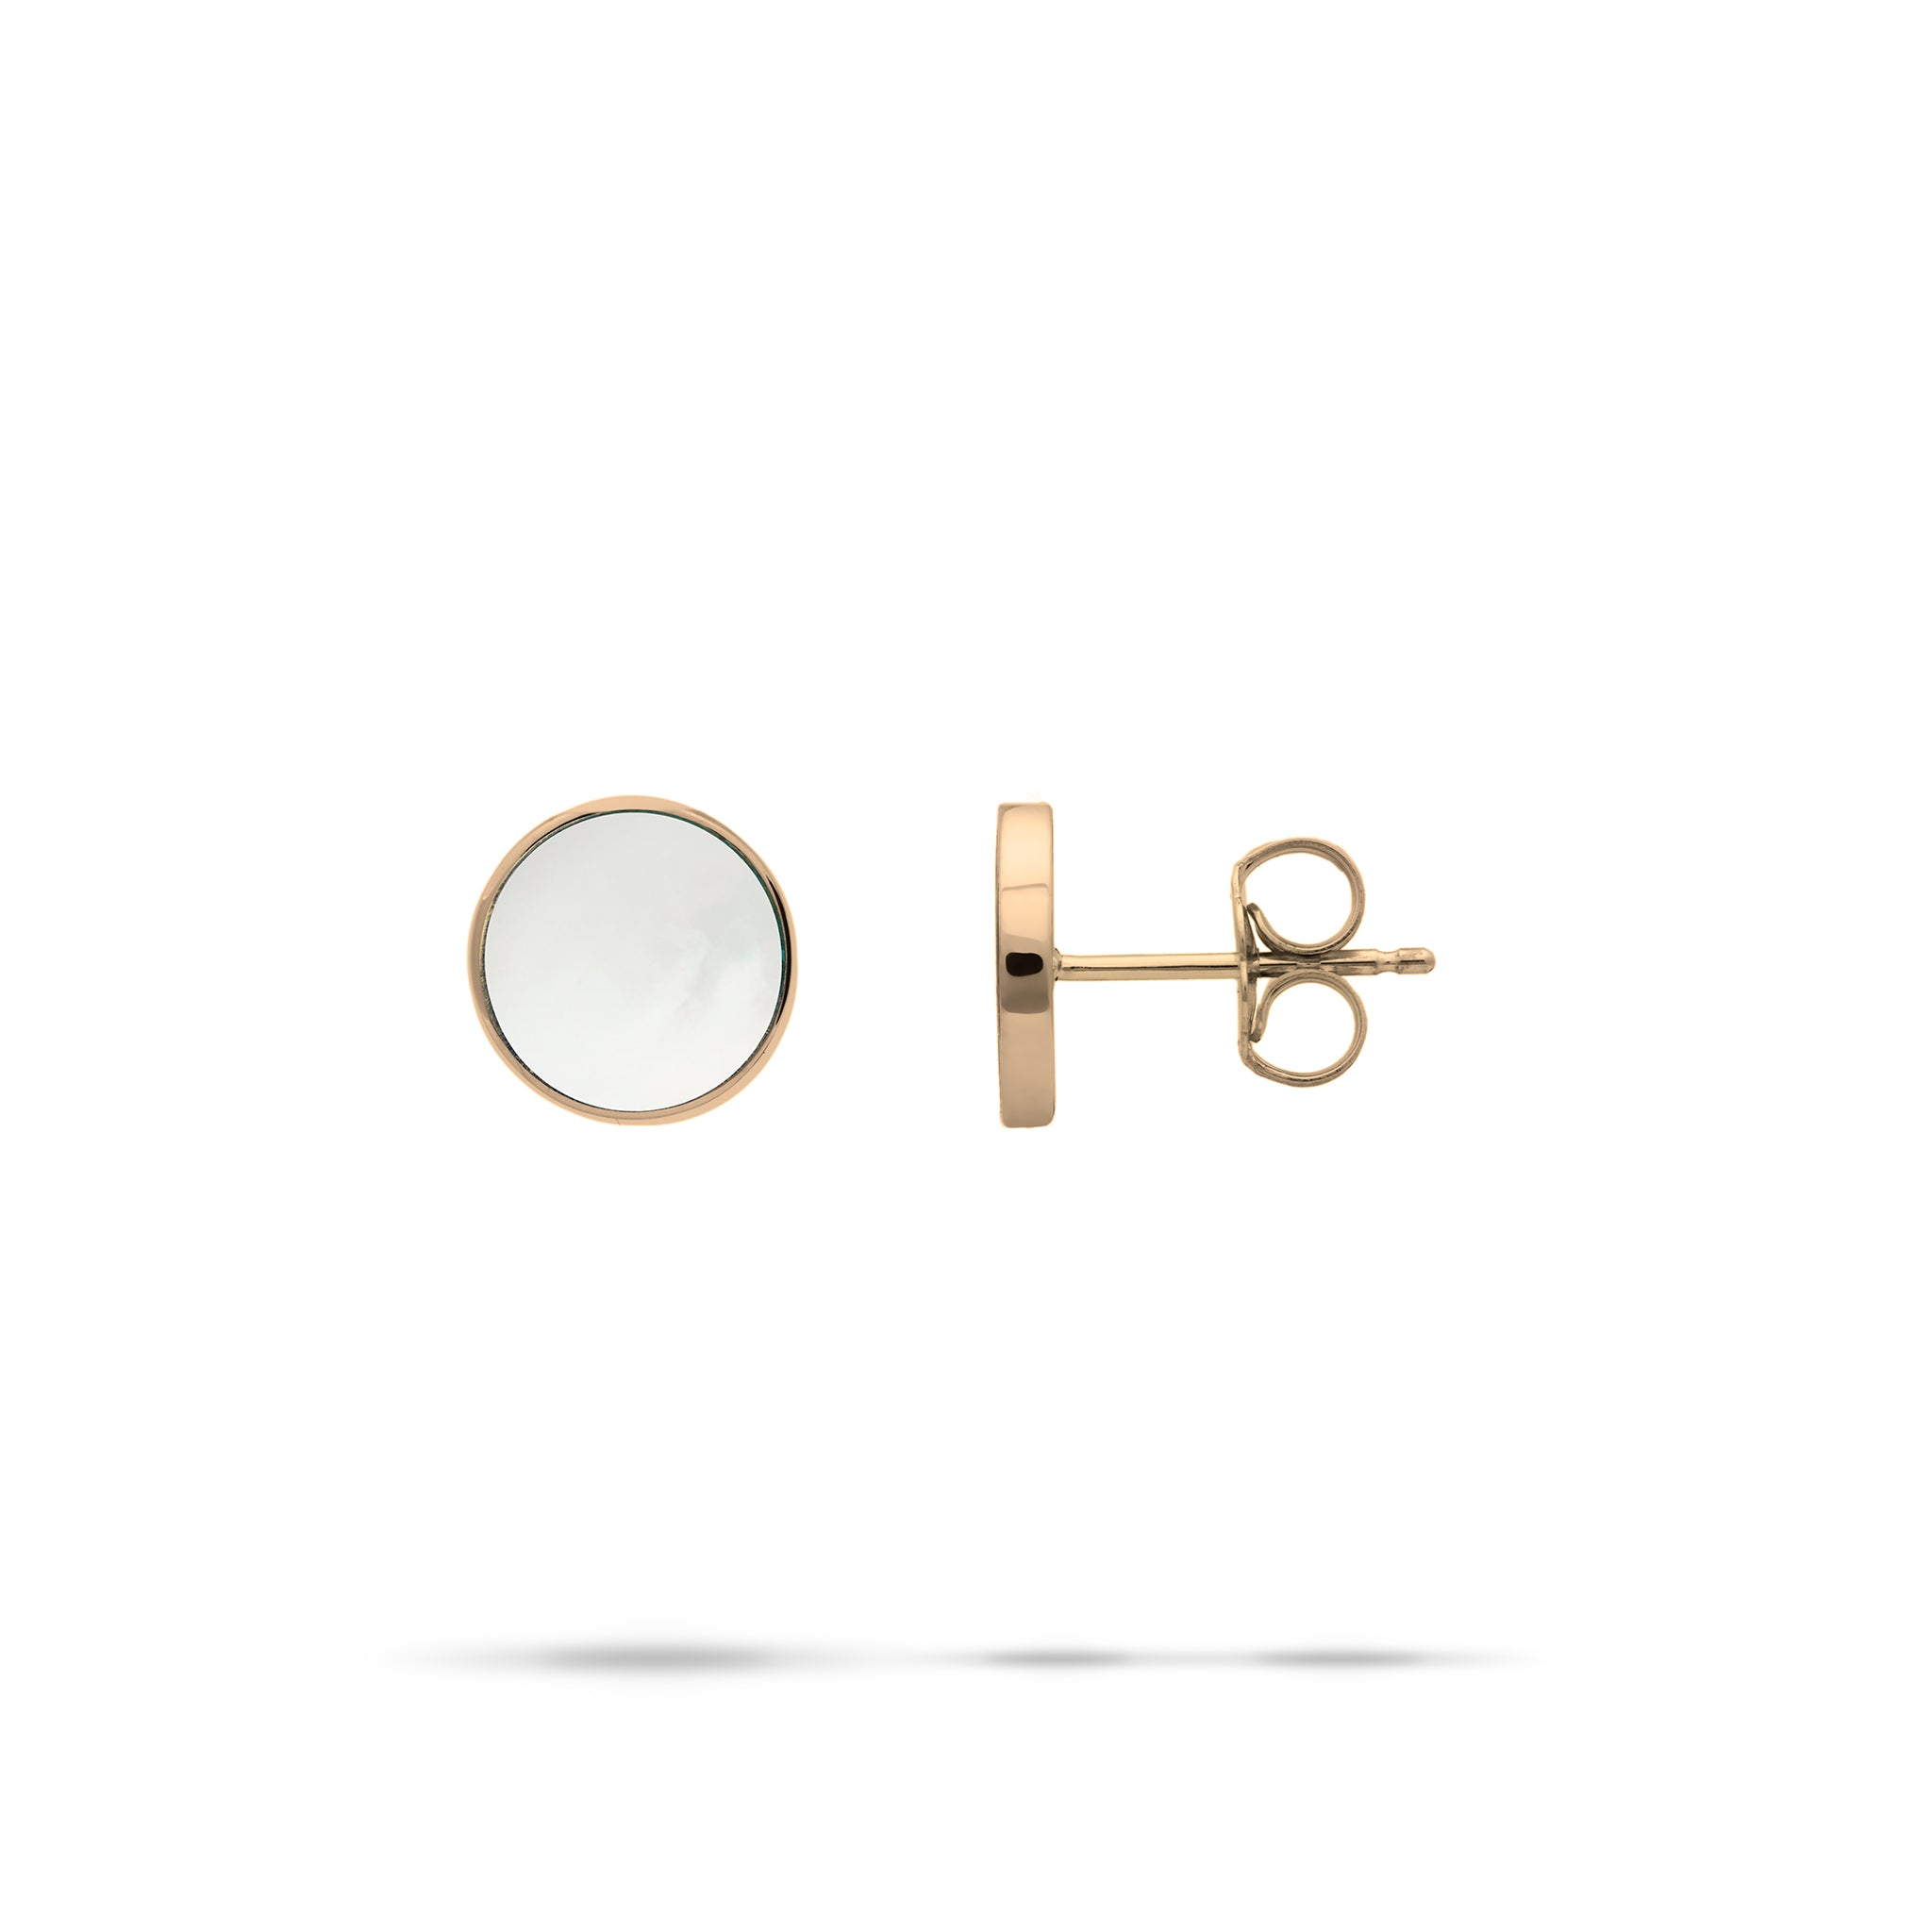 Eclipse Mother of Pearl Earrings in Gold - 9mm